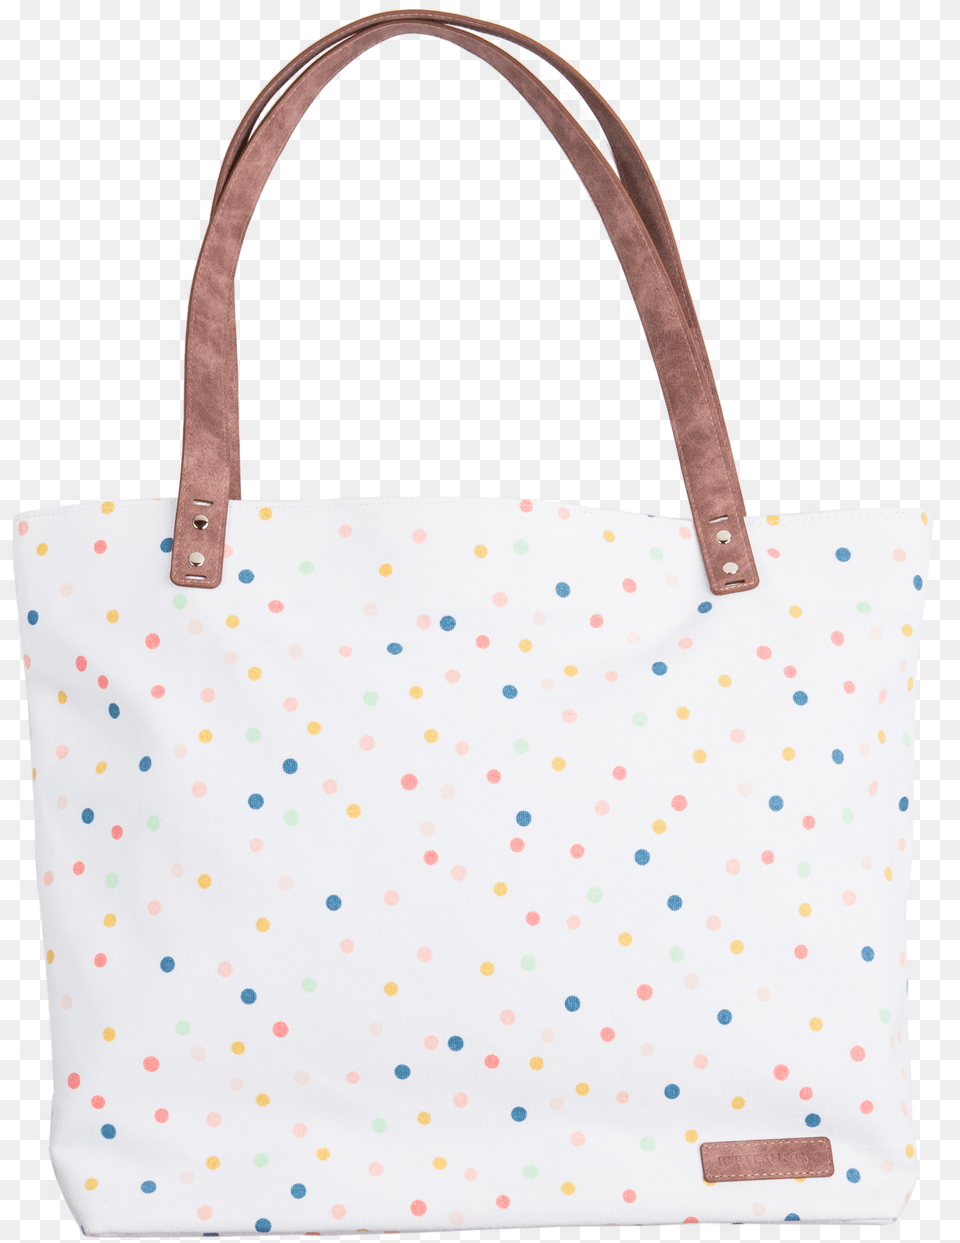 Class Lazyload Lazyload Mirage Cloudzoom Featured Image Tote Bag, Accessories, Handbag, Tote Bag, Purse Free Png